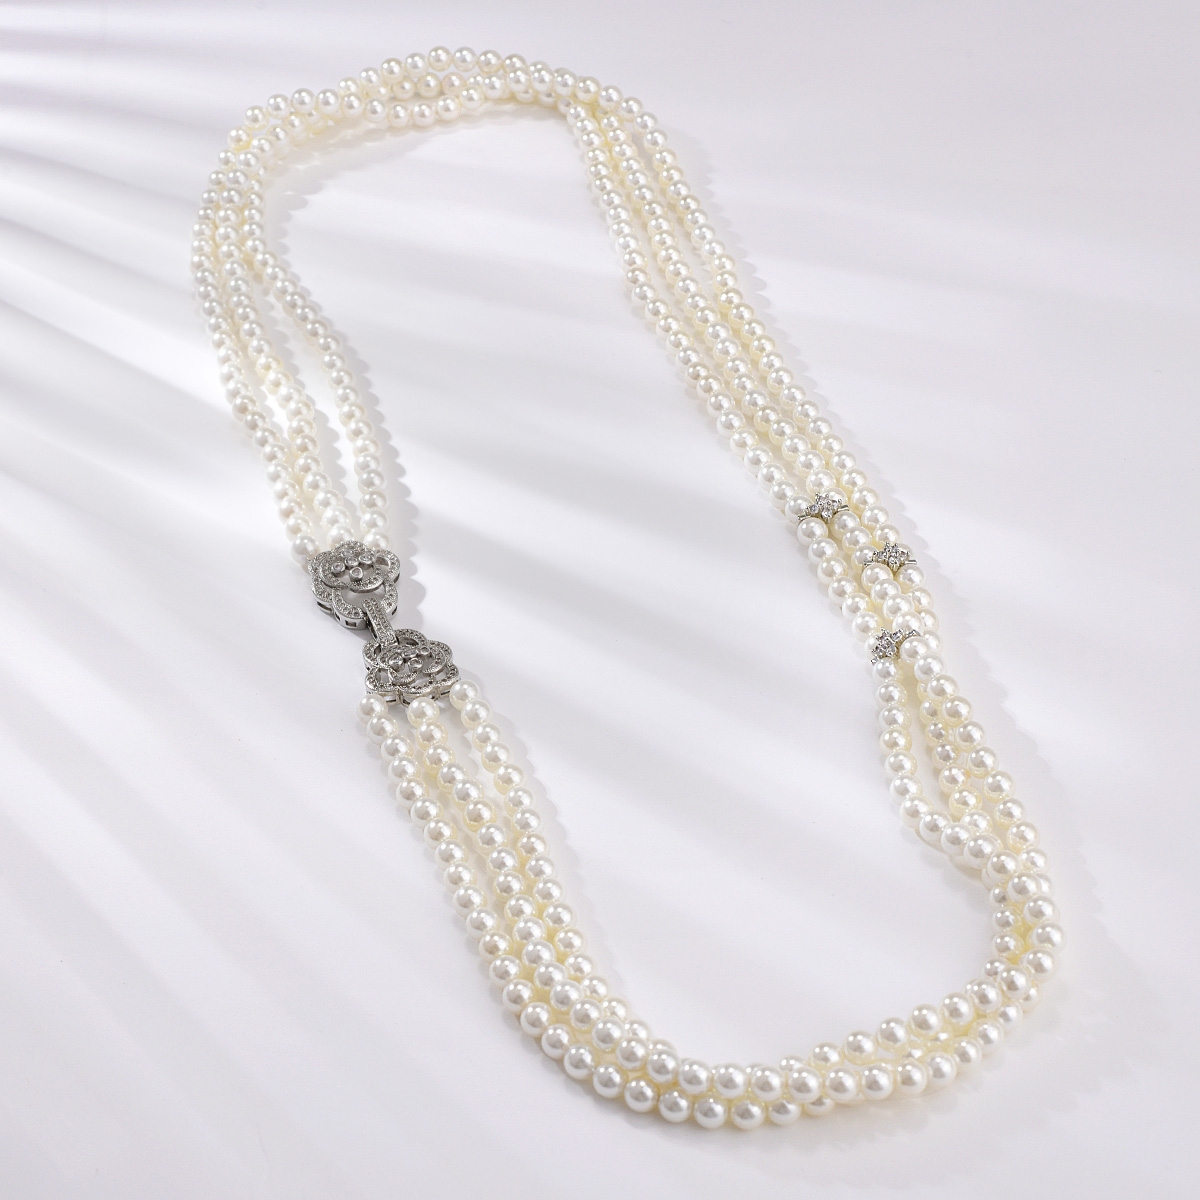 Inexpensive Platinum Plated White Long Chain Necklace of Original Design